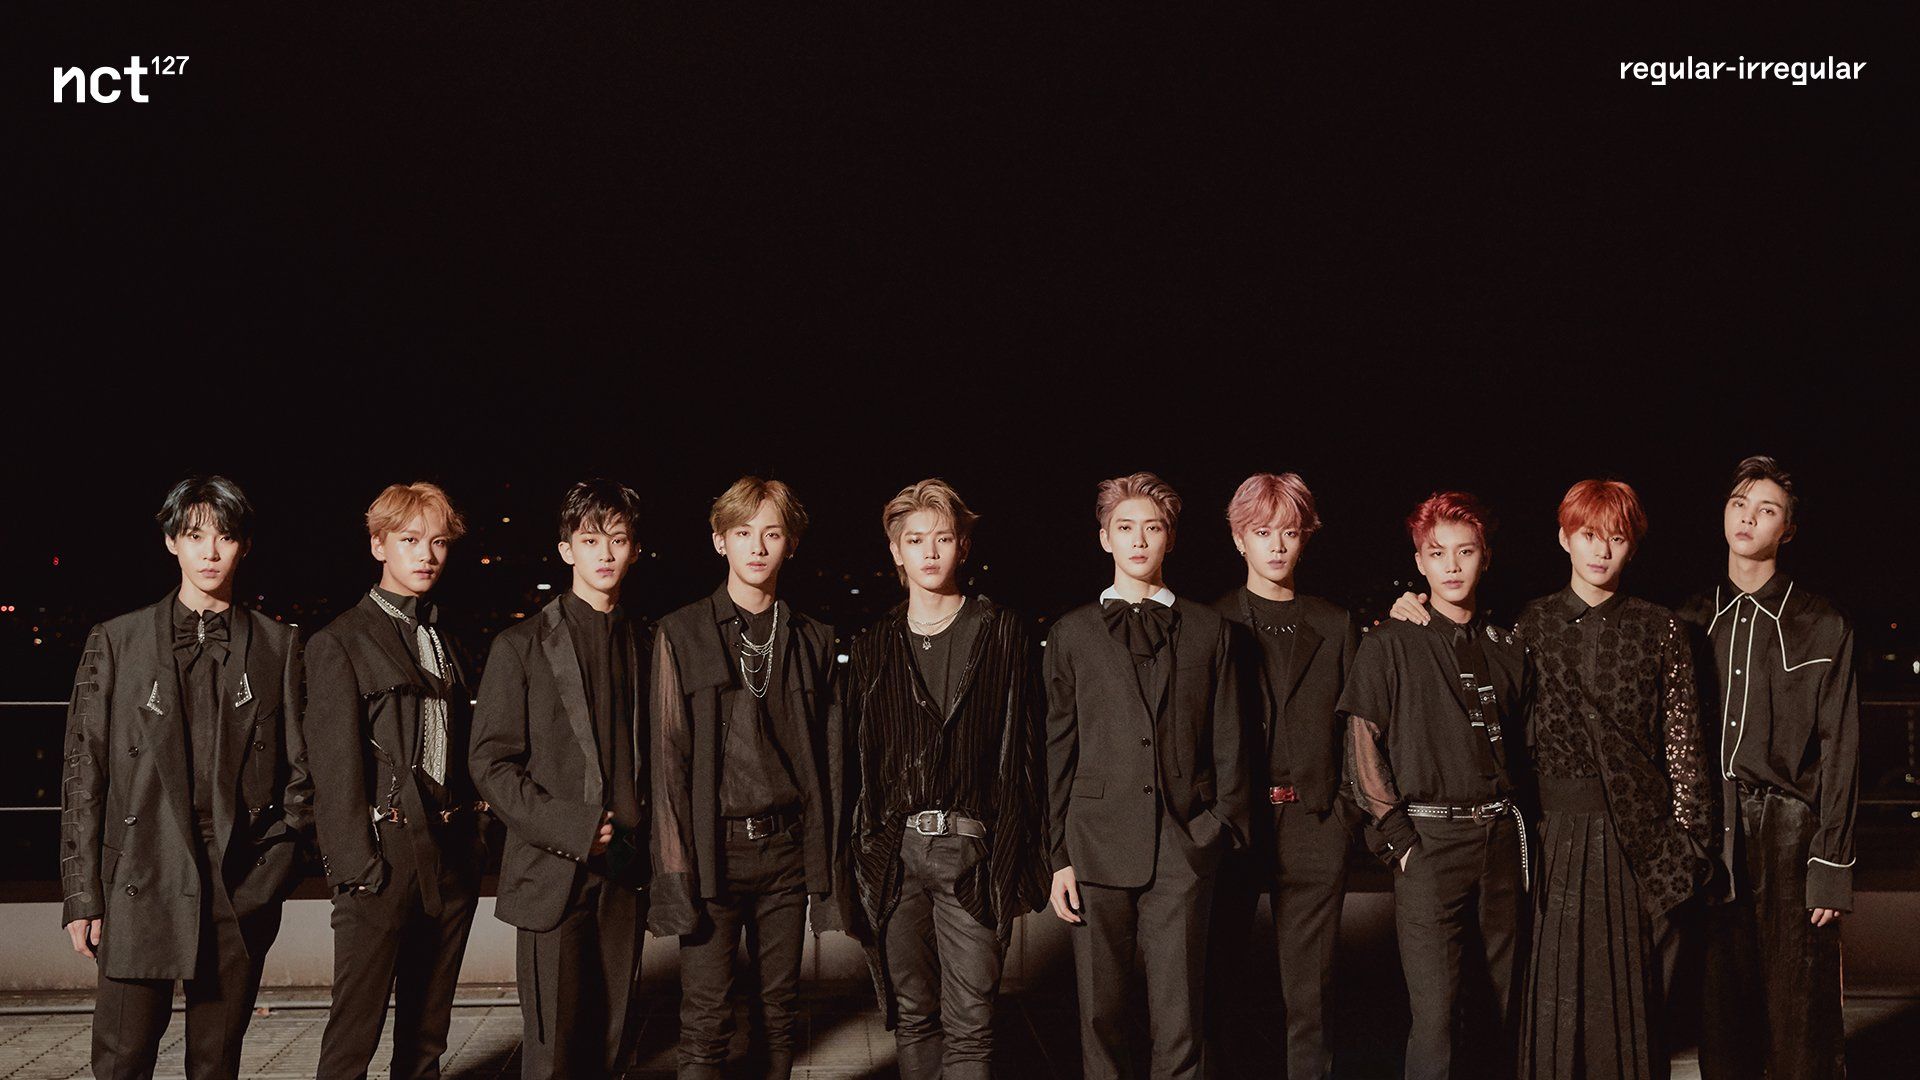 Update: NCT 127 Takes Over The Town In Teaser For Korean MV